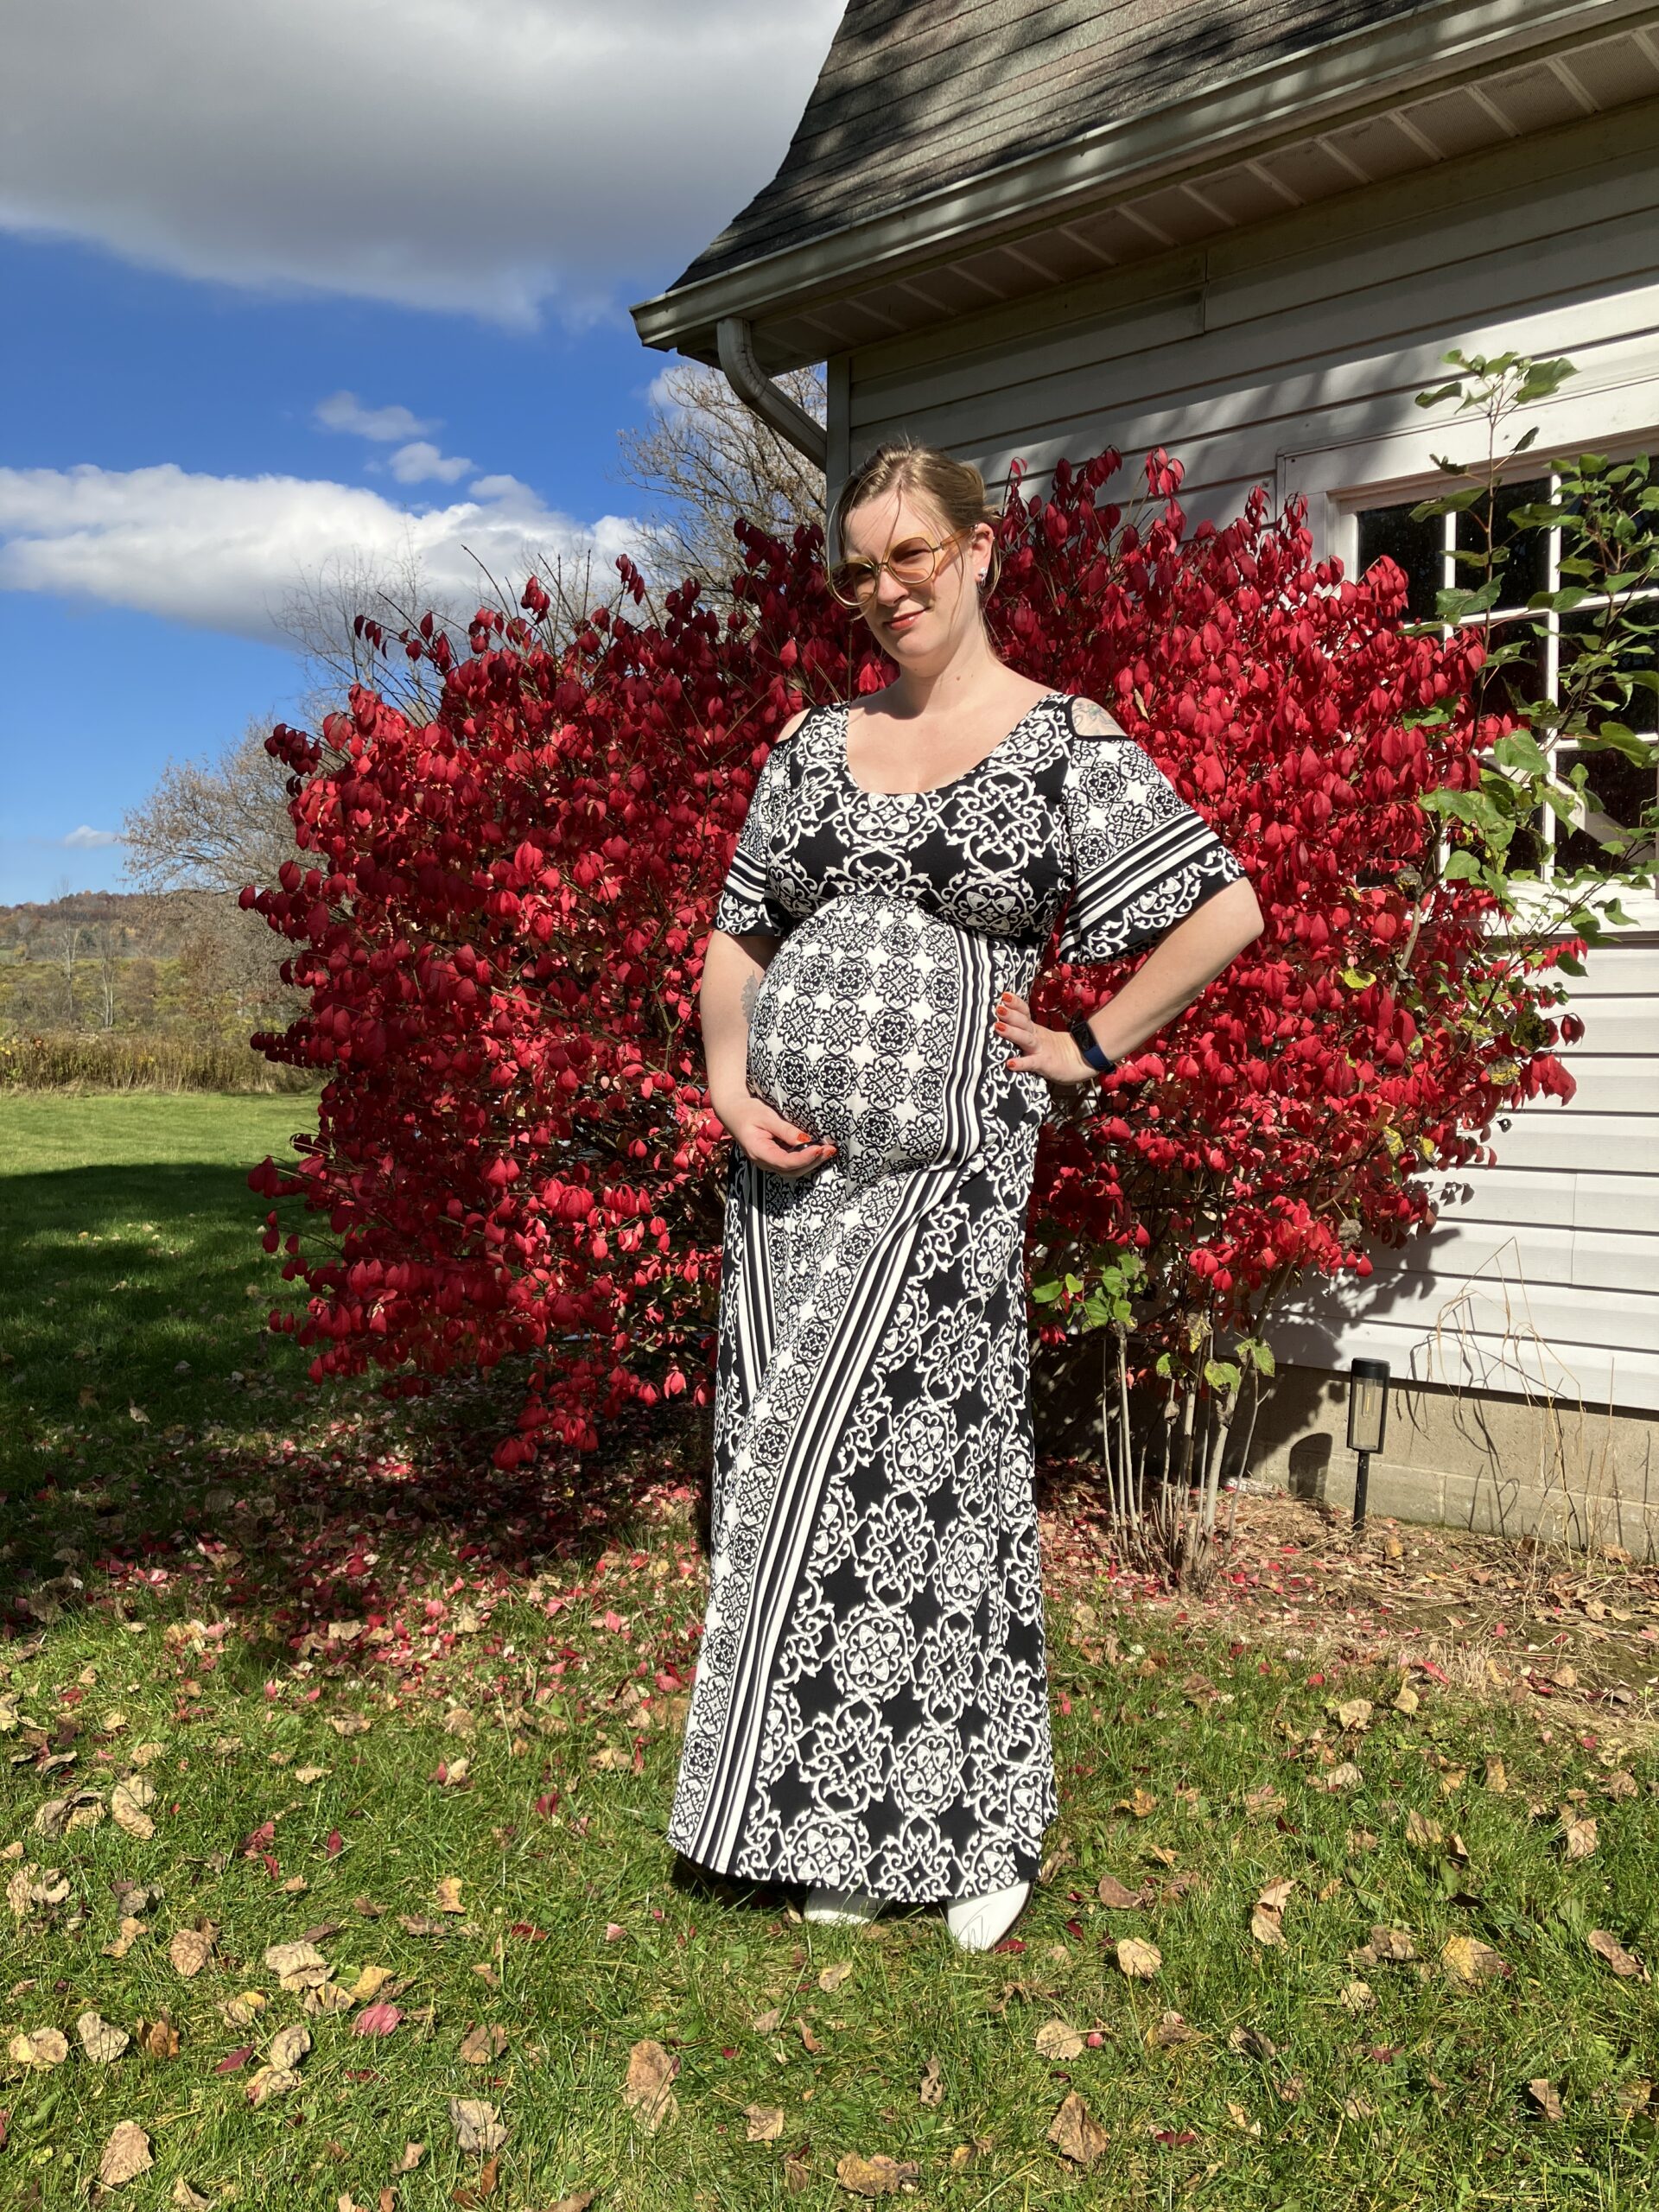 Off the Rack ~ The Full-Bust Maternity Clothing Landscape STINKS